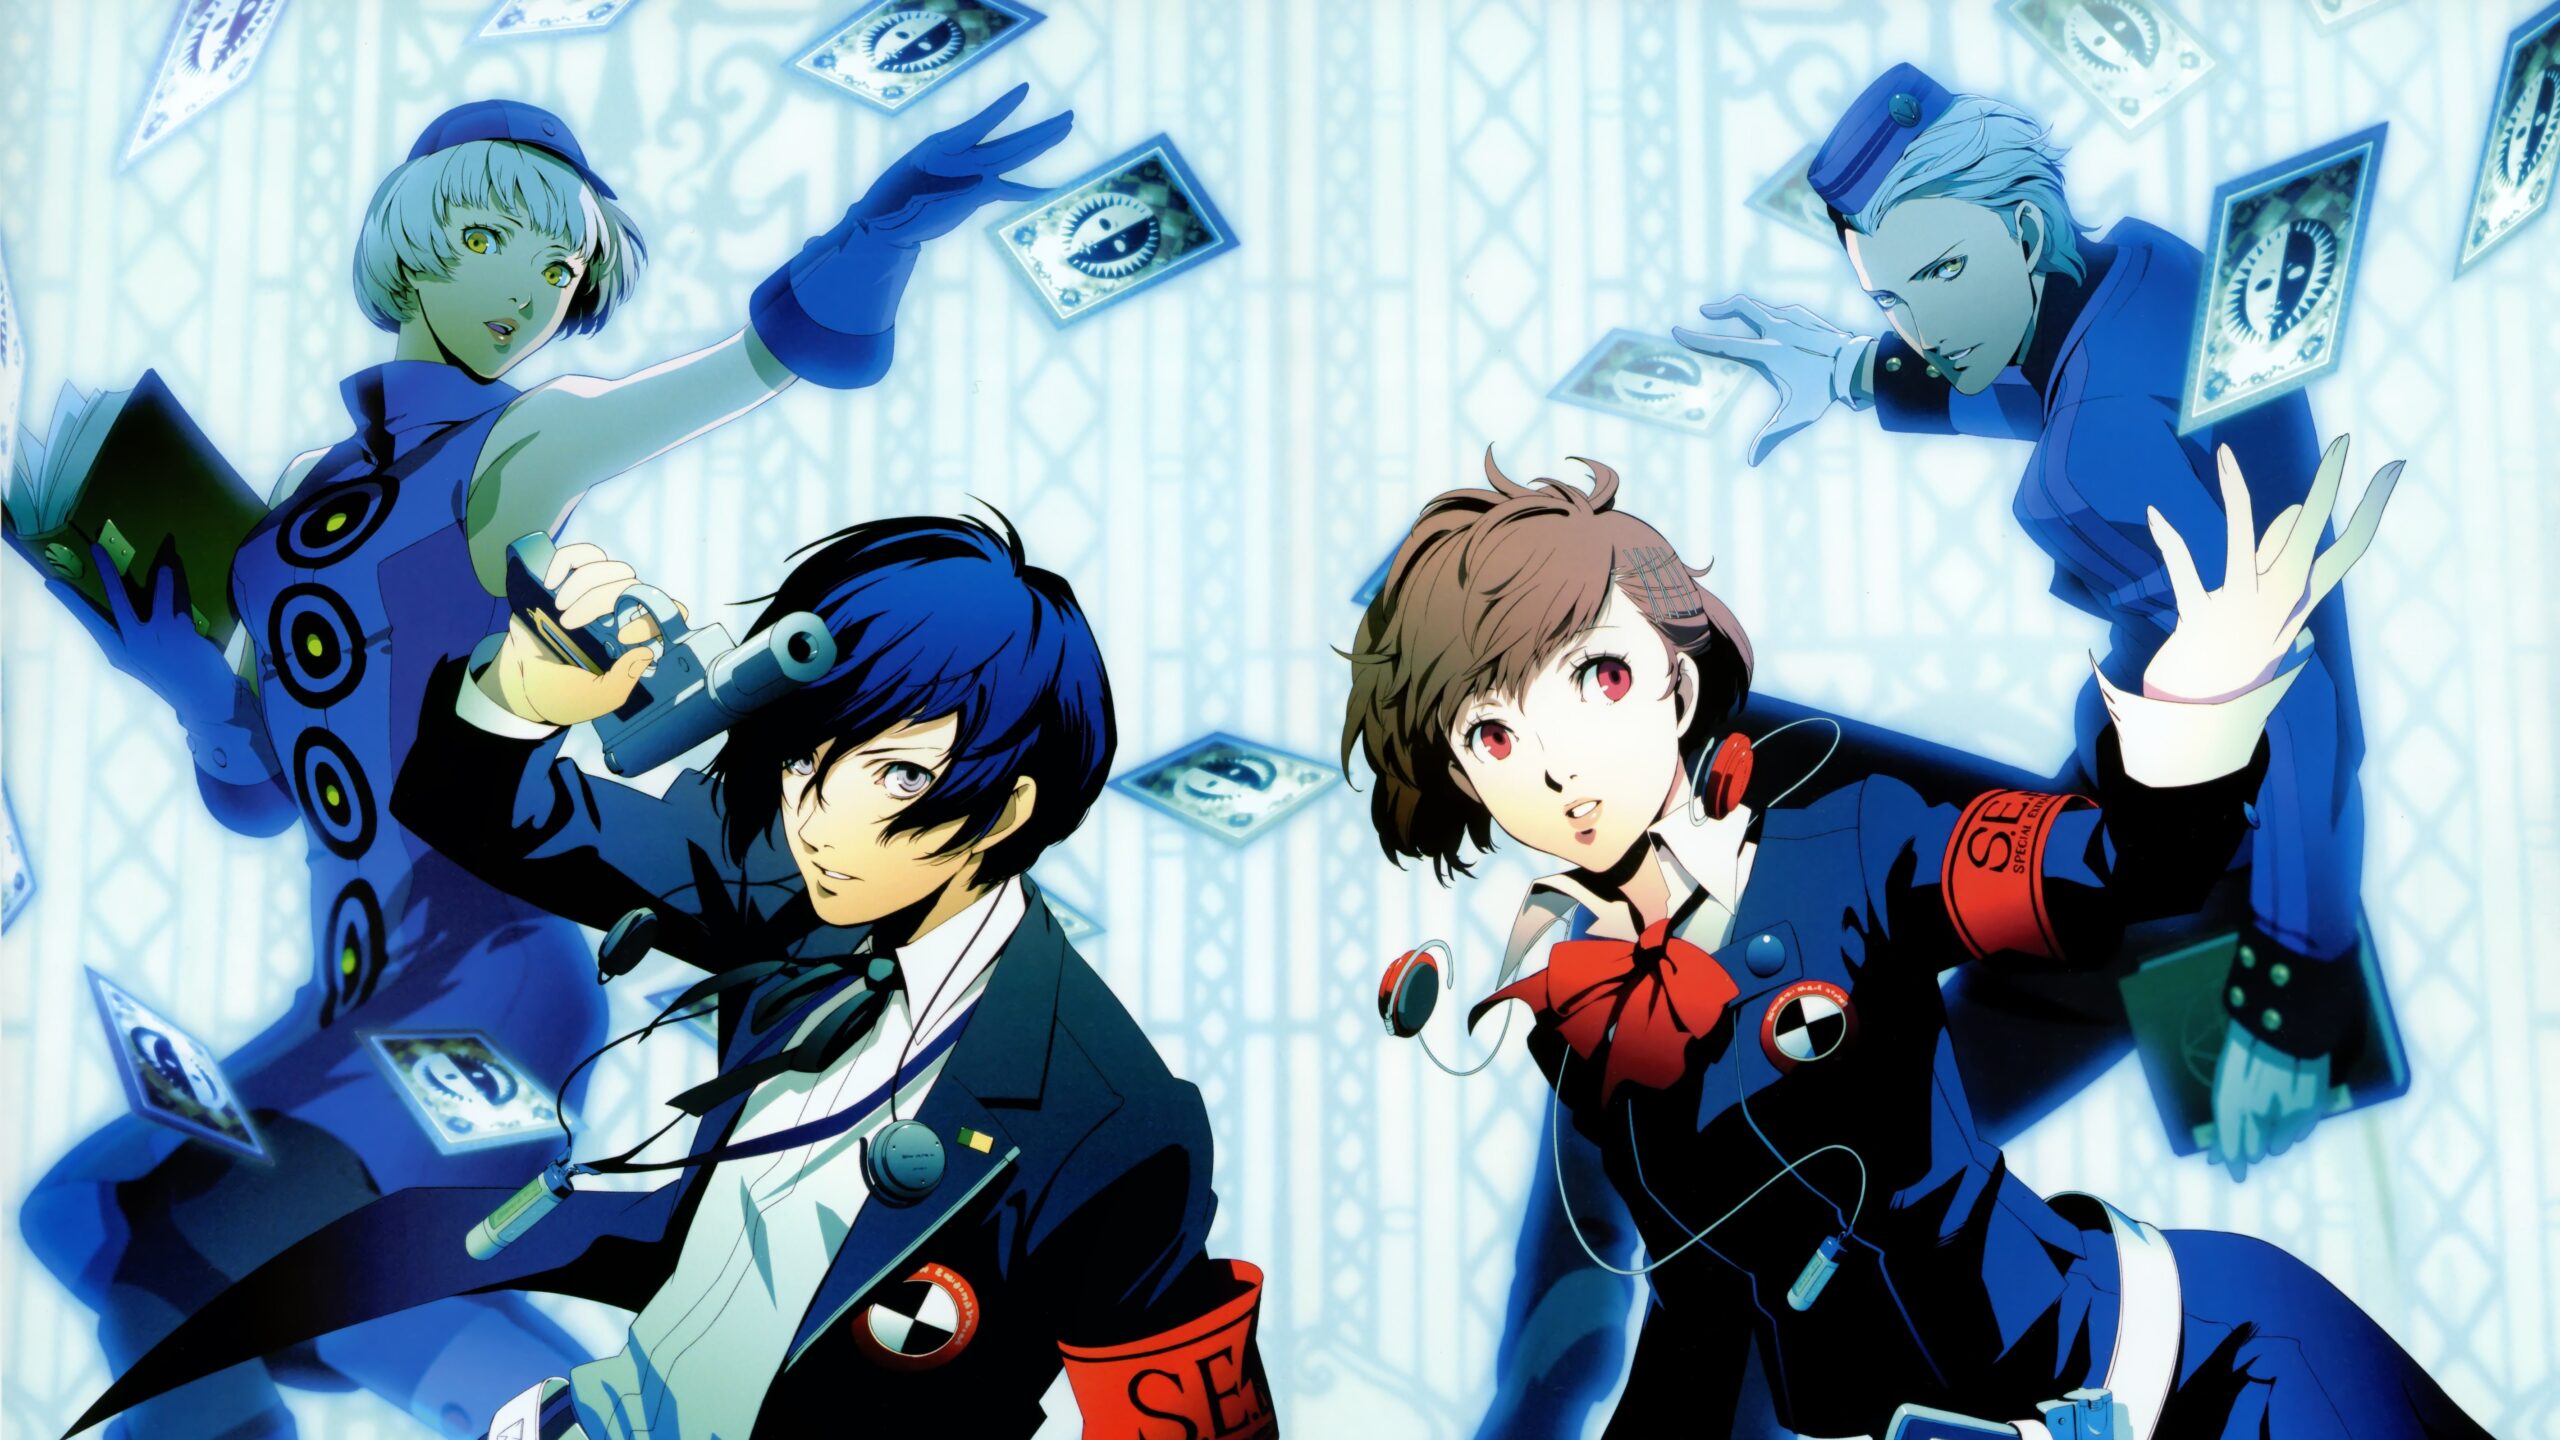 You are currently viewing Persona 3 Portable Physical Copies: Limited Run Games Release Date, Editions, and Limited Availability